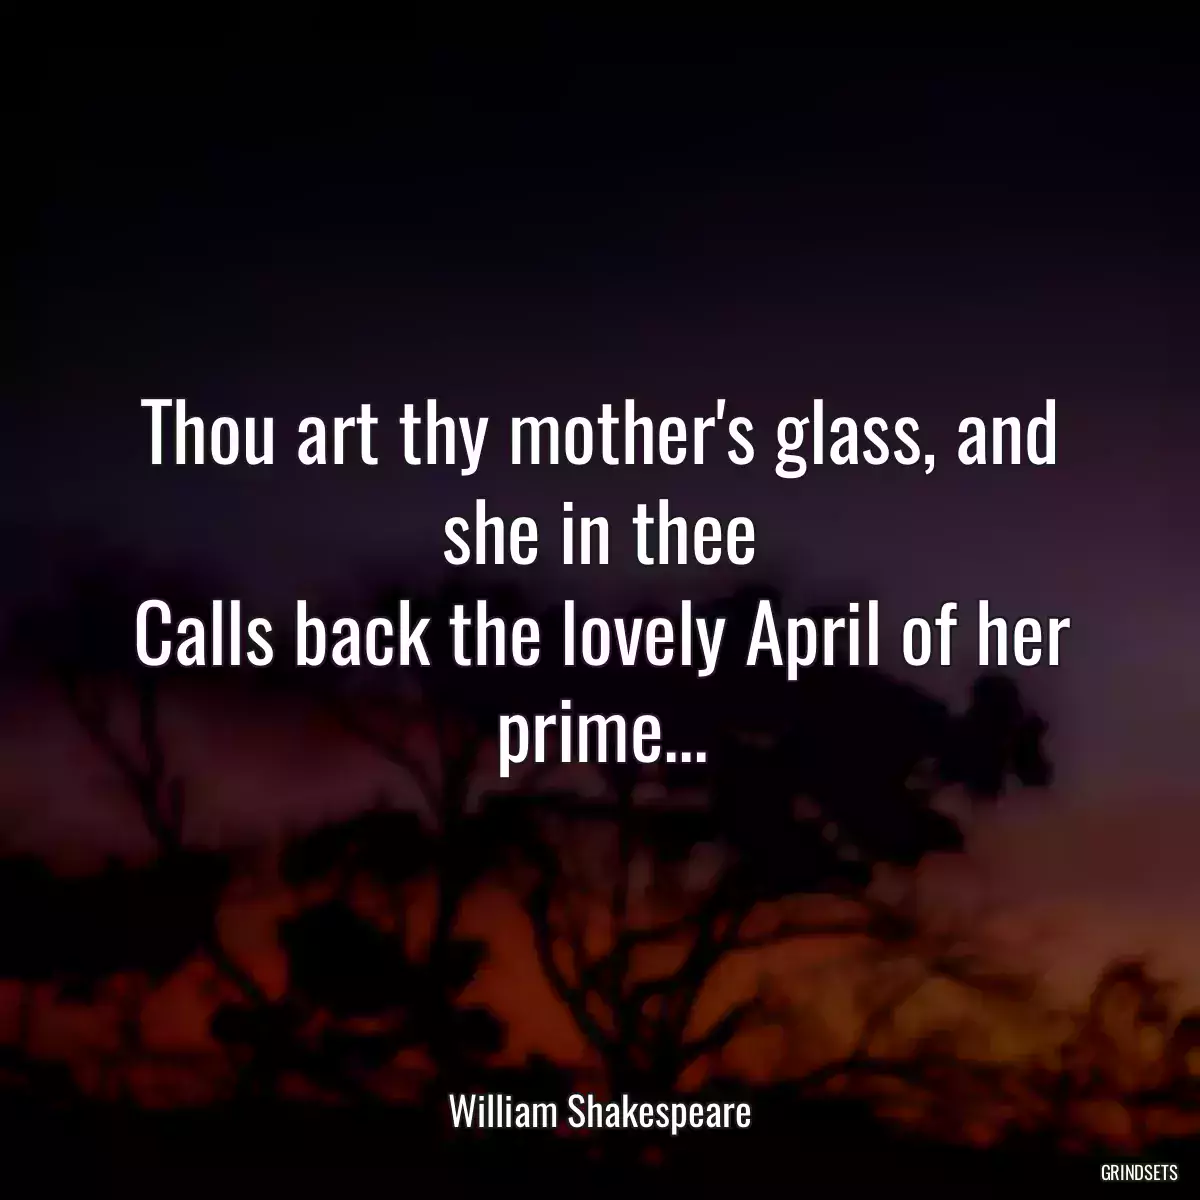 Thou art thy mother\'s glass, and she in thee
Calls back the lovely April of her prime...